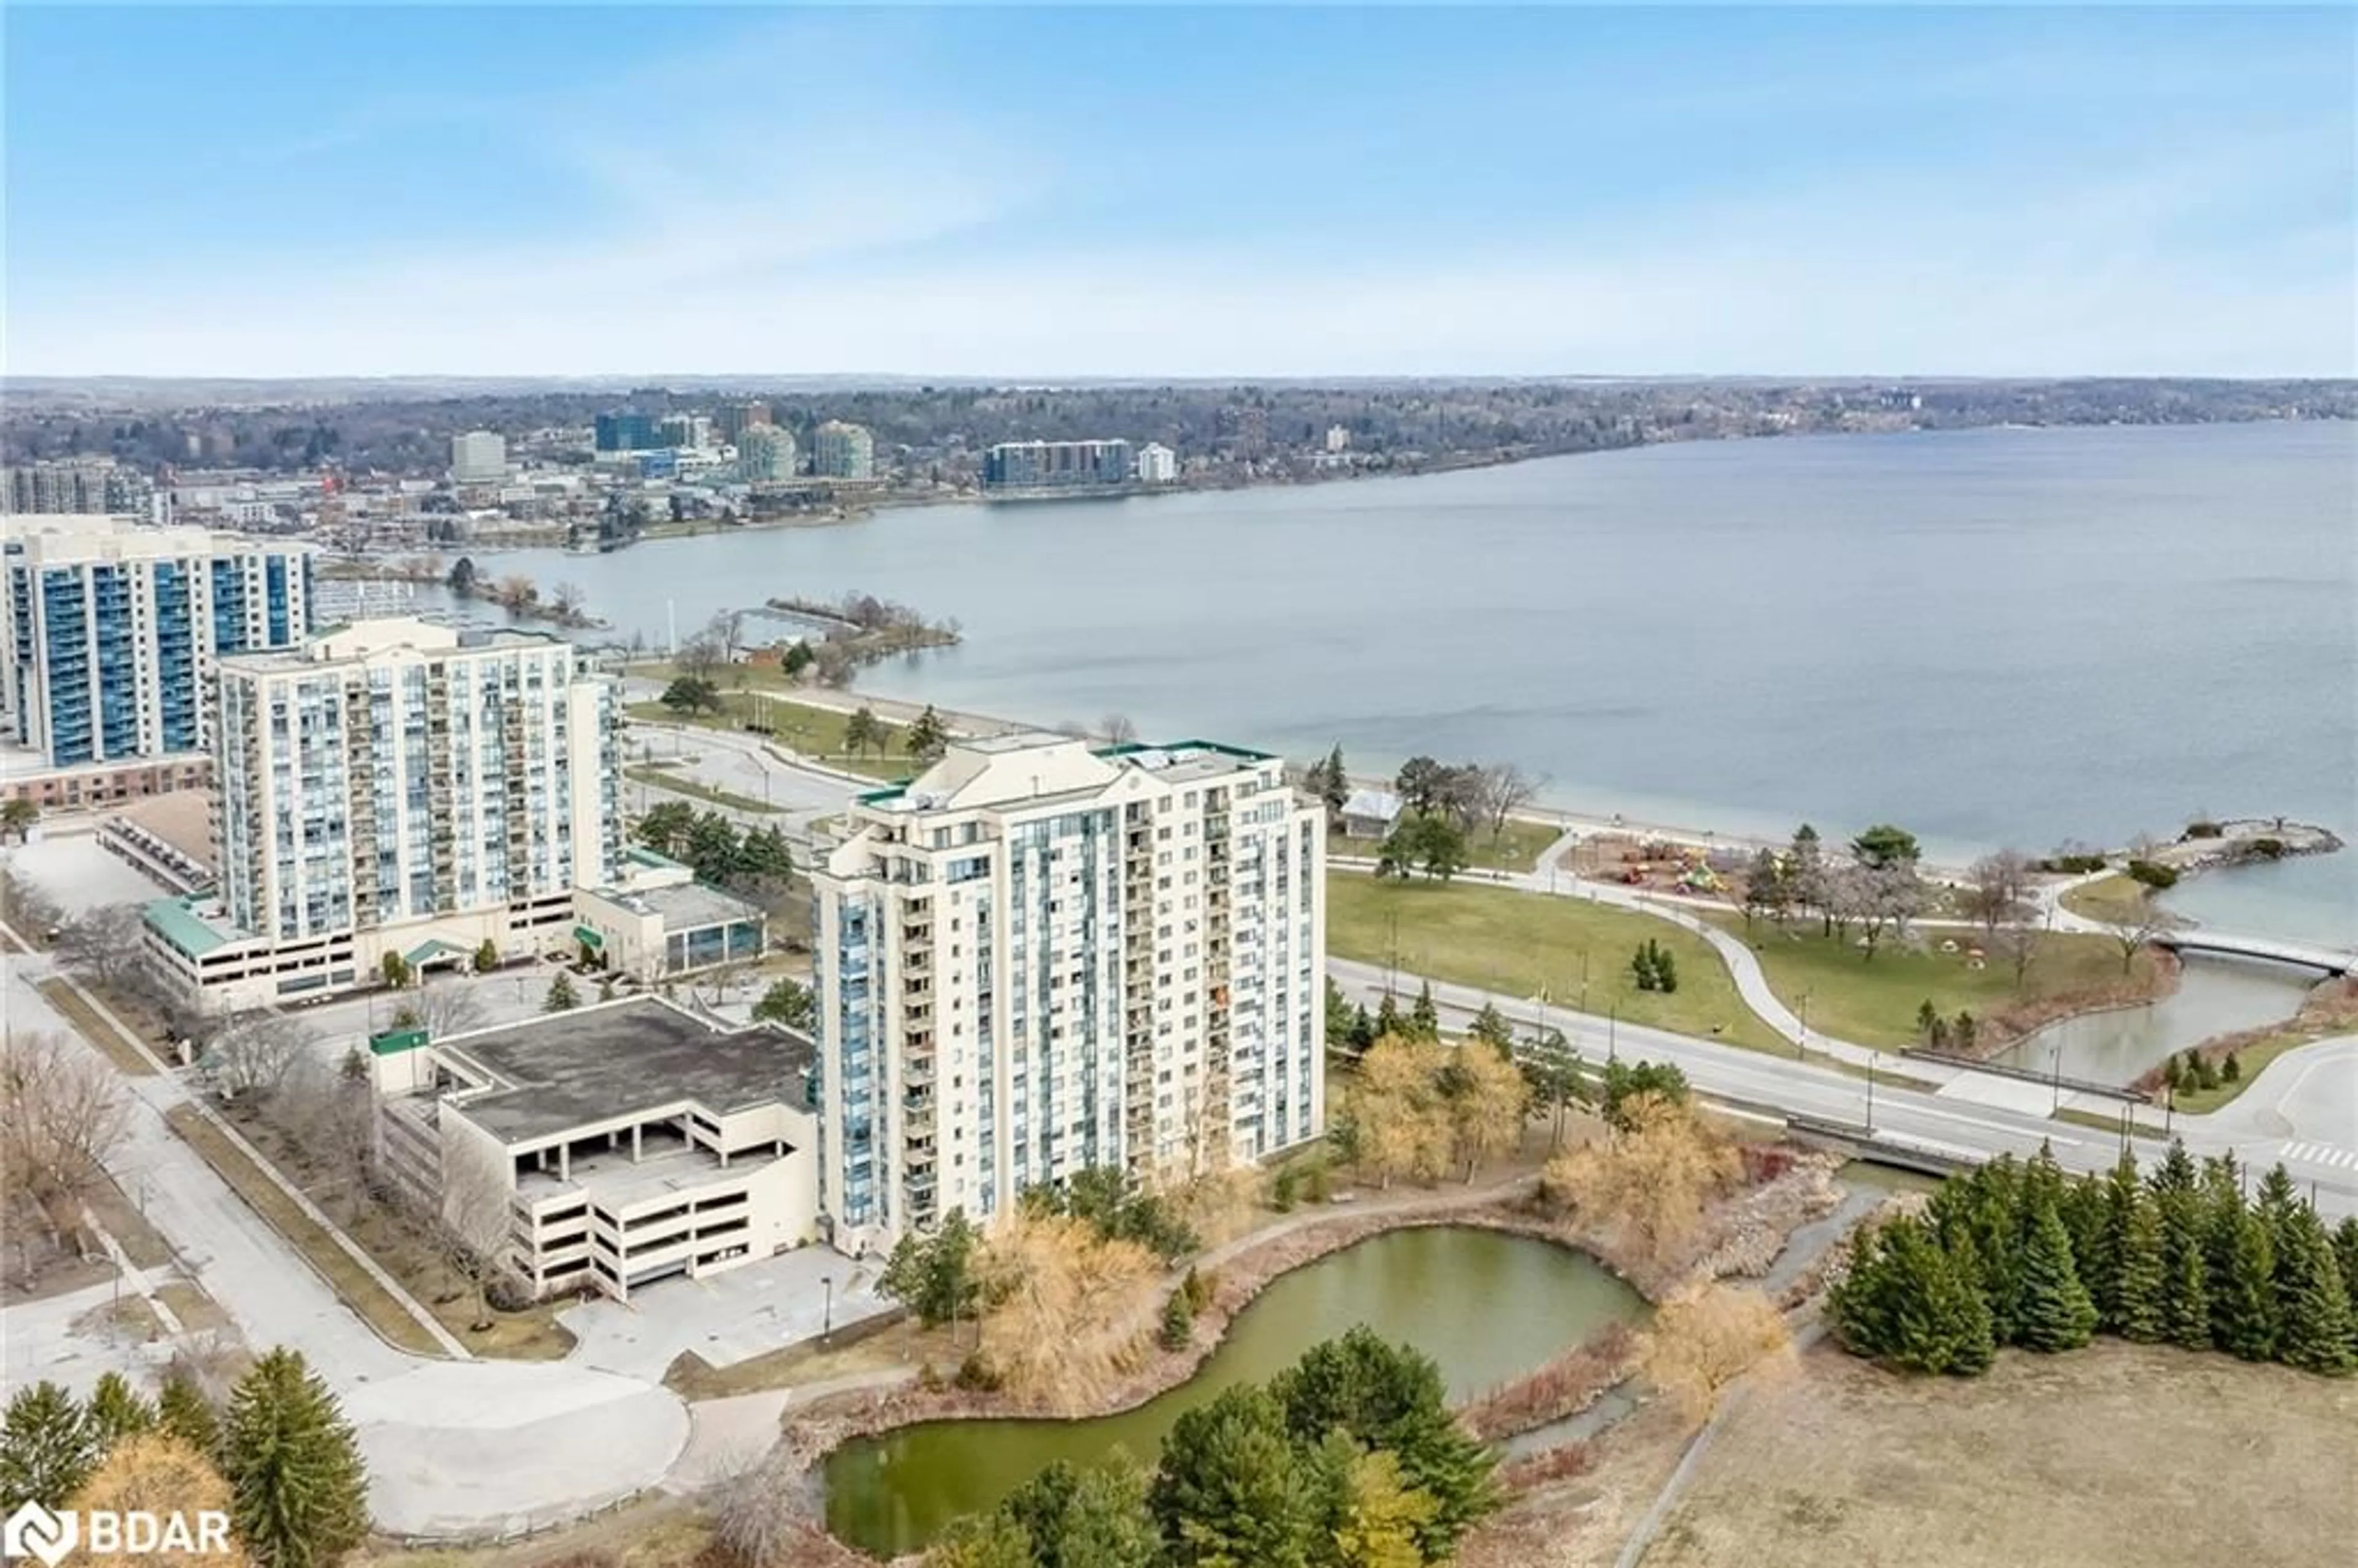 Lakeview for 75 Ellen St #1704, Barrie Ontario L4N 7R6